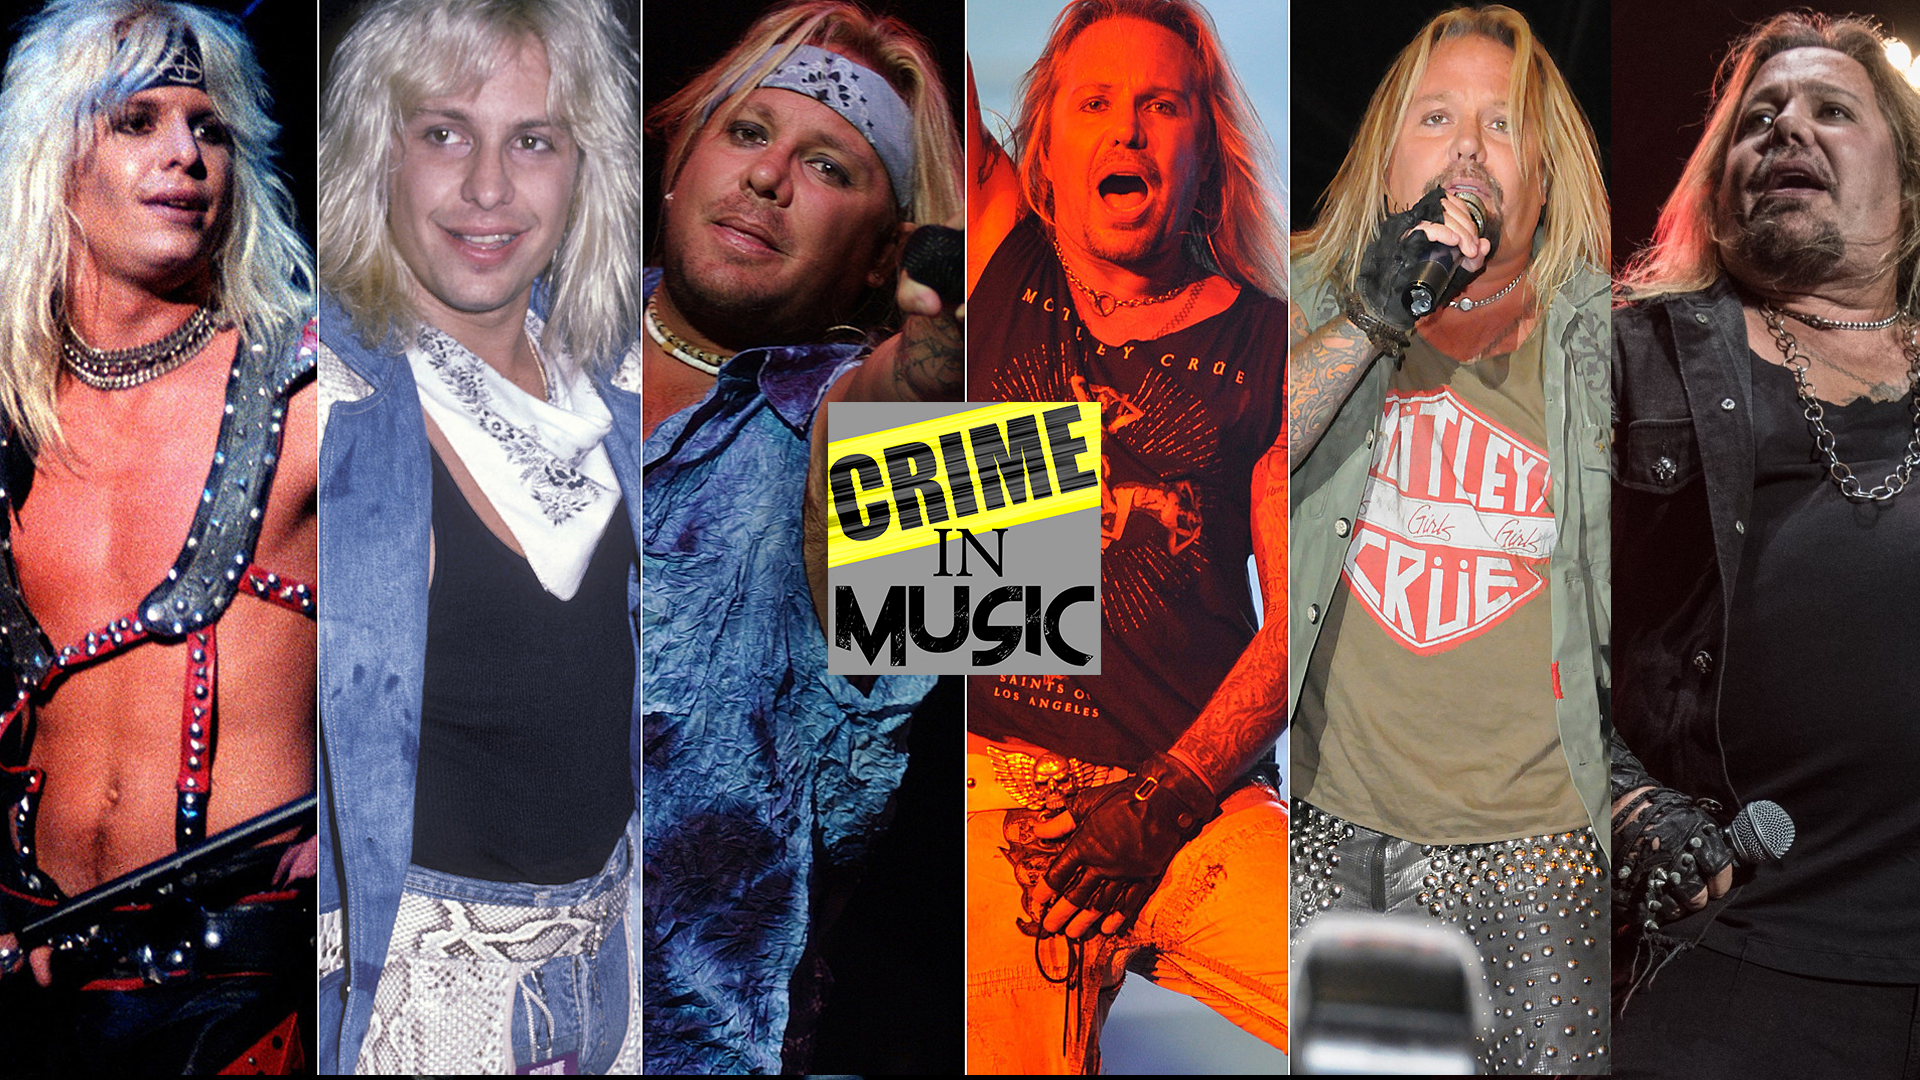 photo collage of Vince Neil, Musician, Lead Singer of Motley Crue